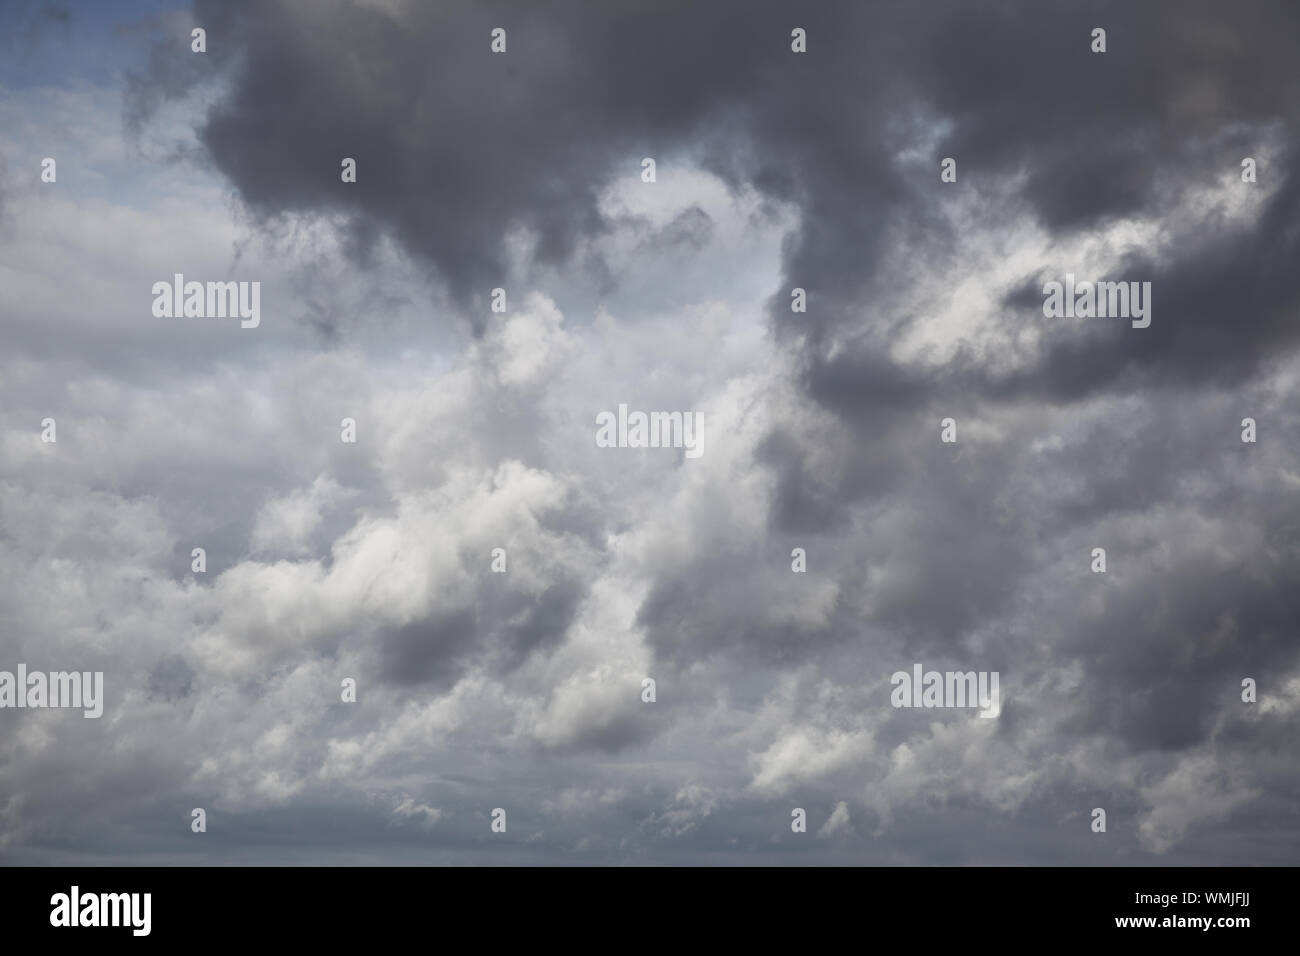 Autumn sky with grey heavy clouds, may be used as background Stock Photo